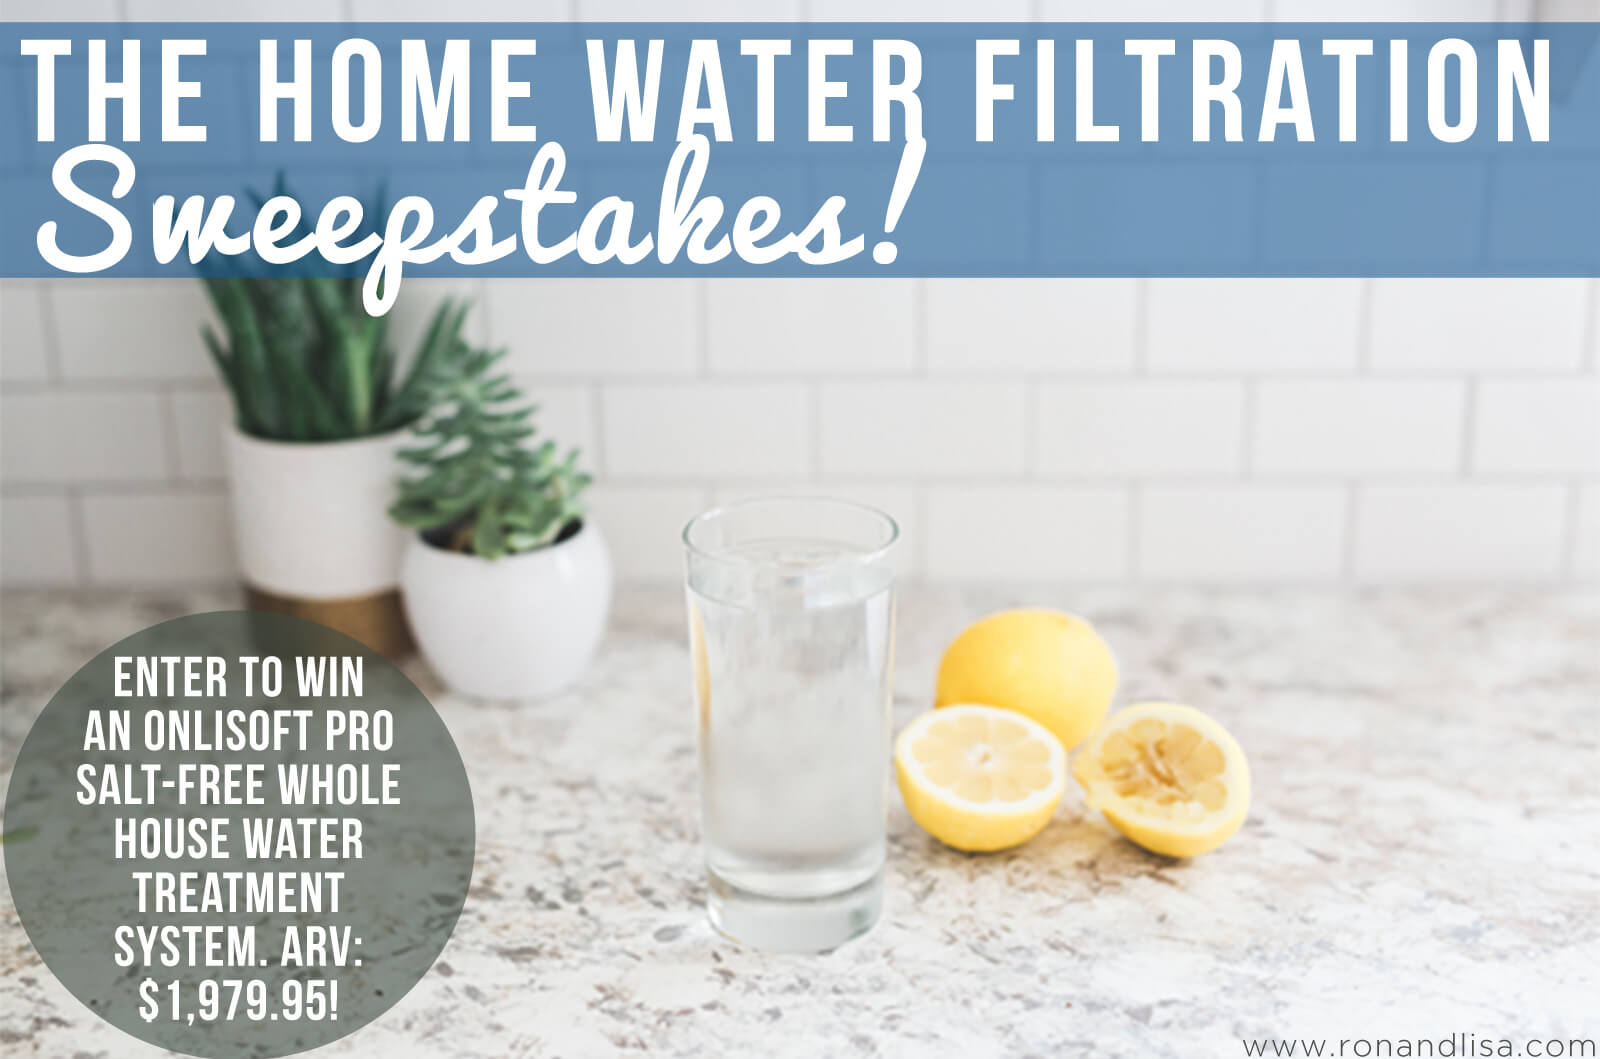 The Home Water Filtration Sweepstakes!